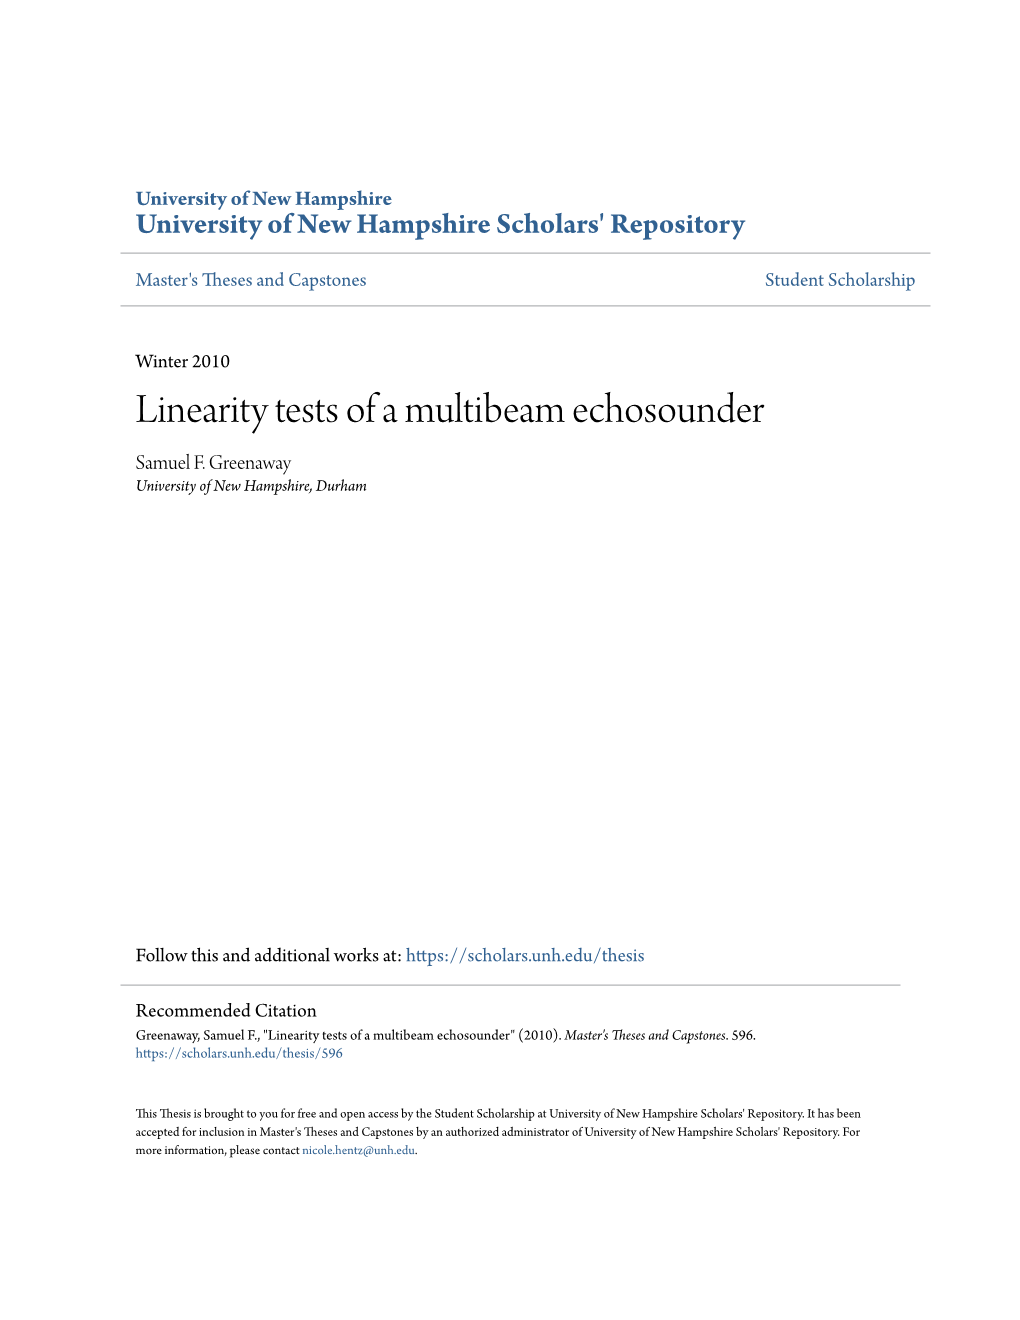 Linearity Tests of a Multibeam Echosounder Samuel F